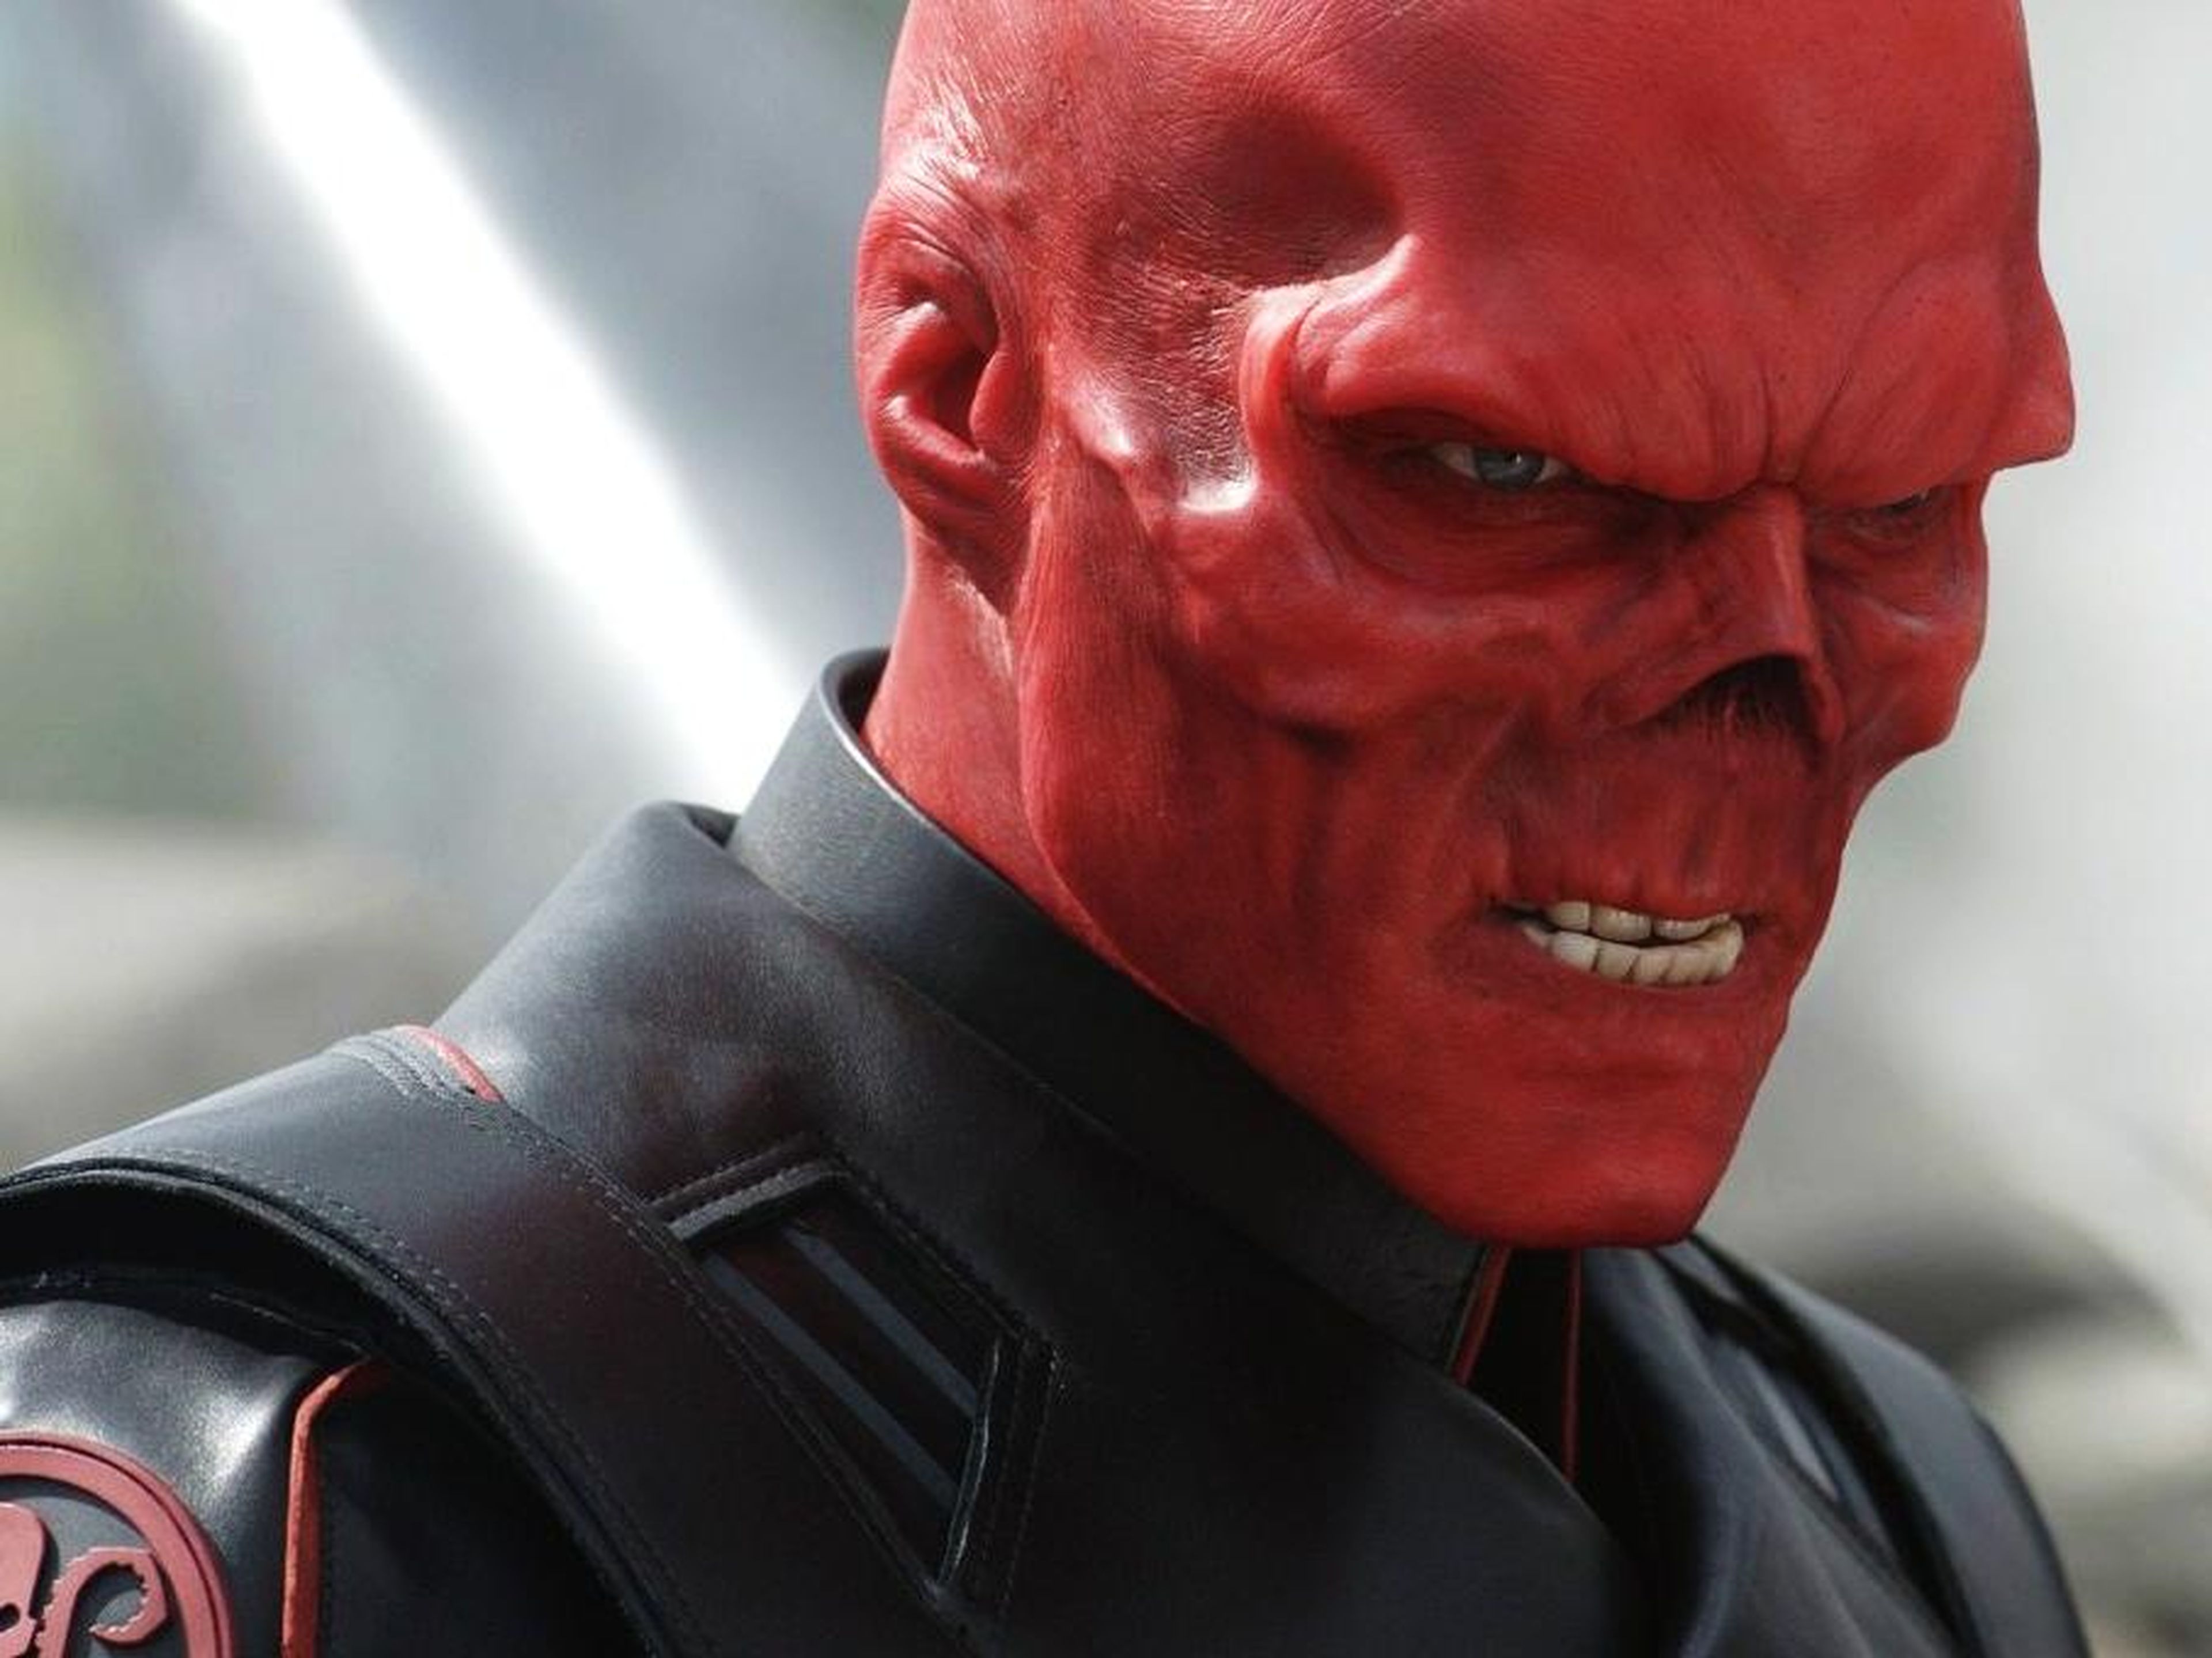 Red Skull is the villain in "Captain America: The First Avenger," and he's interested in one of the Infinity Stones.